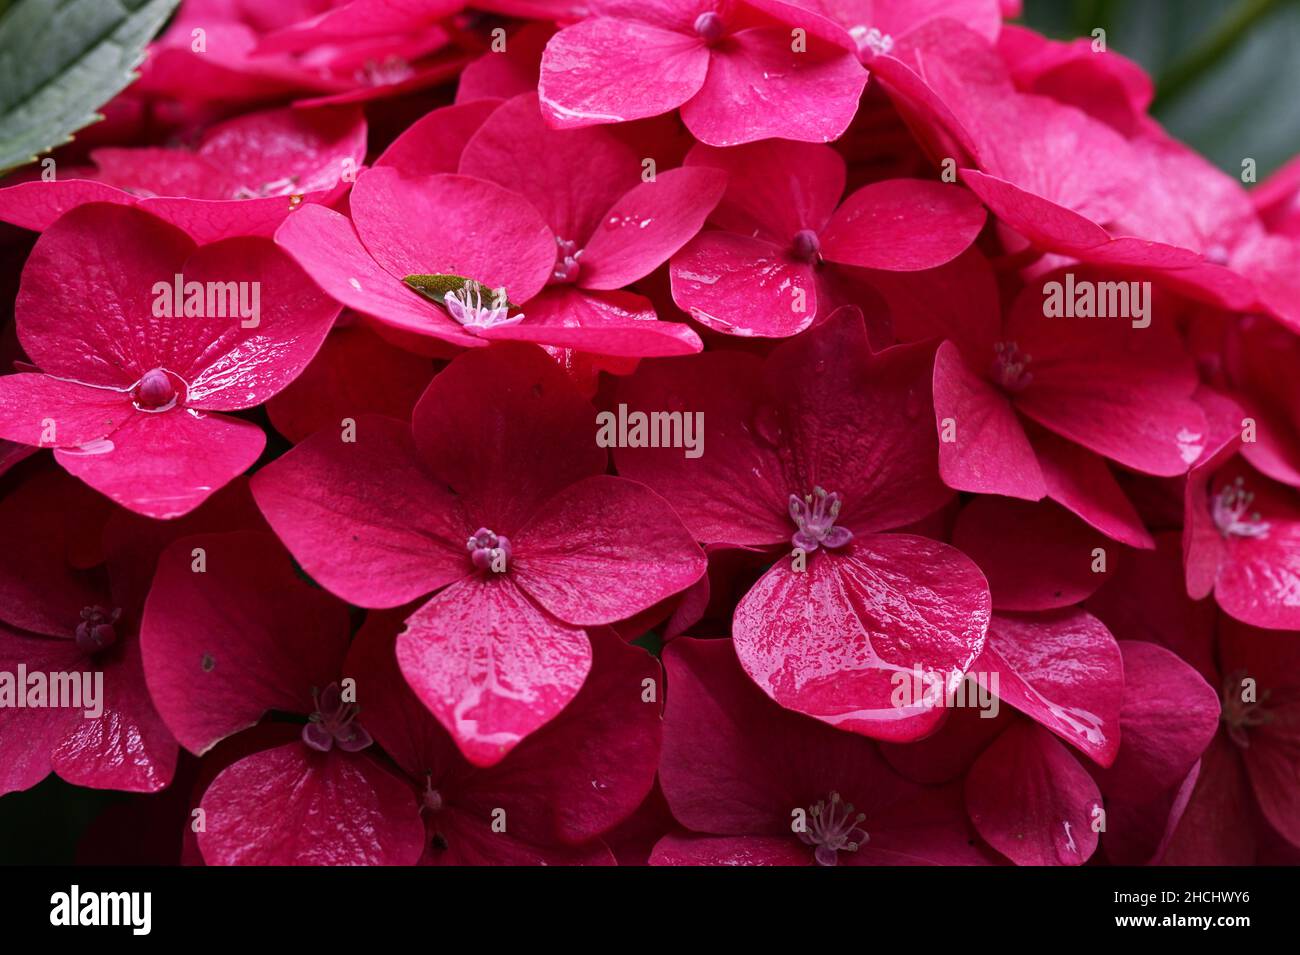 Close-up of bright pink Hydrangea macrophylla flowers just after a rain shower. Stock Photo